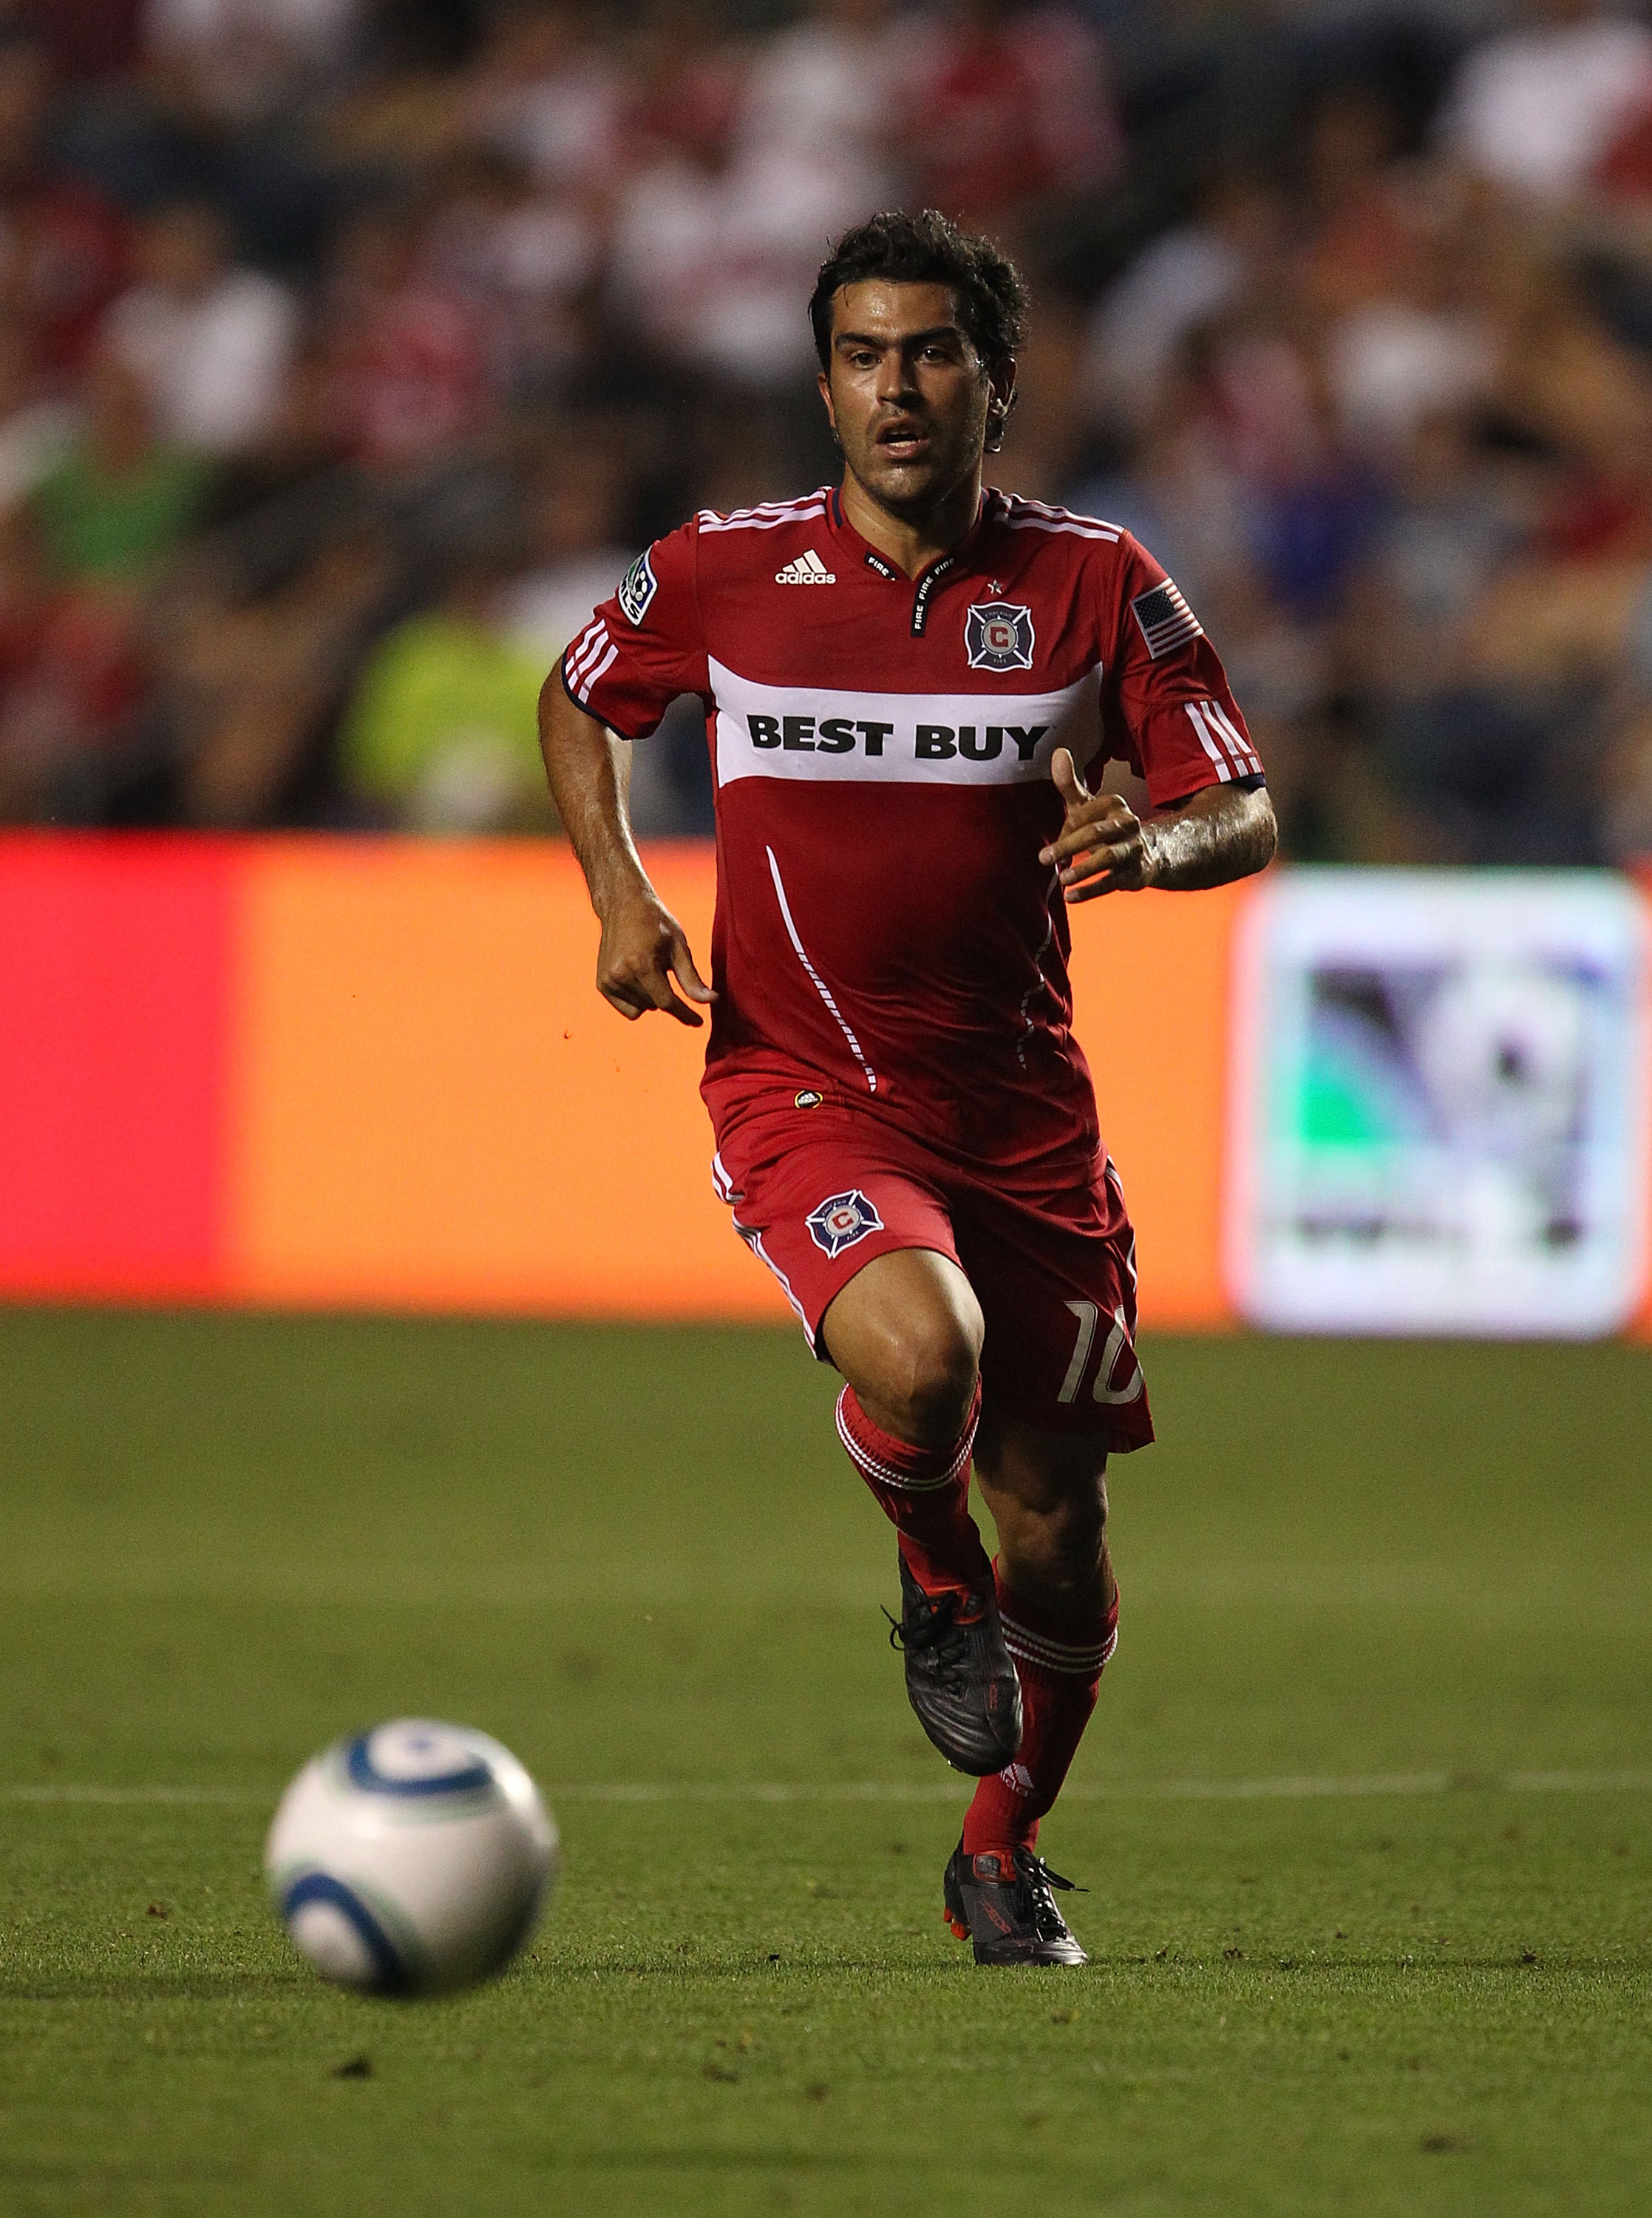 BRIDGEVIEW, IL - AUGUST 08: Nery Castillo #10 of the Chicago Fire chases down the ball against the New York Red Bulls in an MLS match on August 8, 2010 at Toyota Park in Bridgeview, Illinois. The Fire and the Red Bulls tied 0-0. (Photo by Jonathan Daniel/